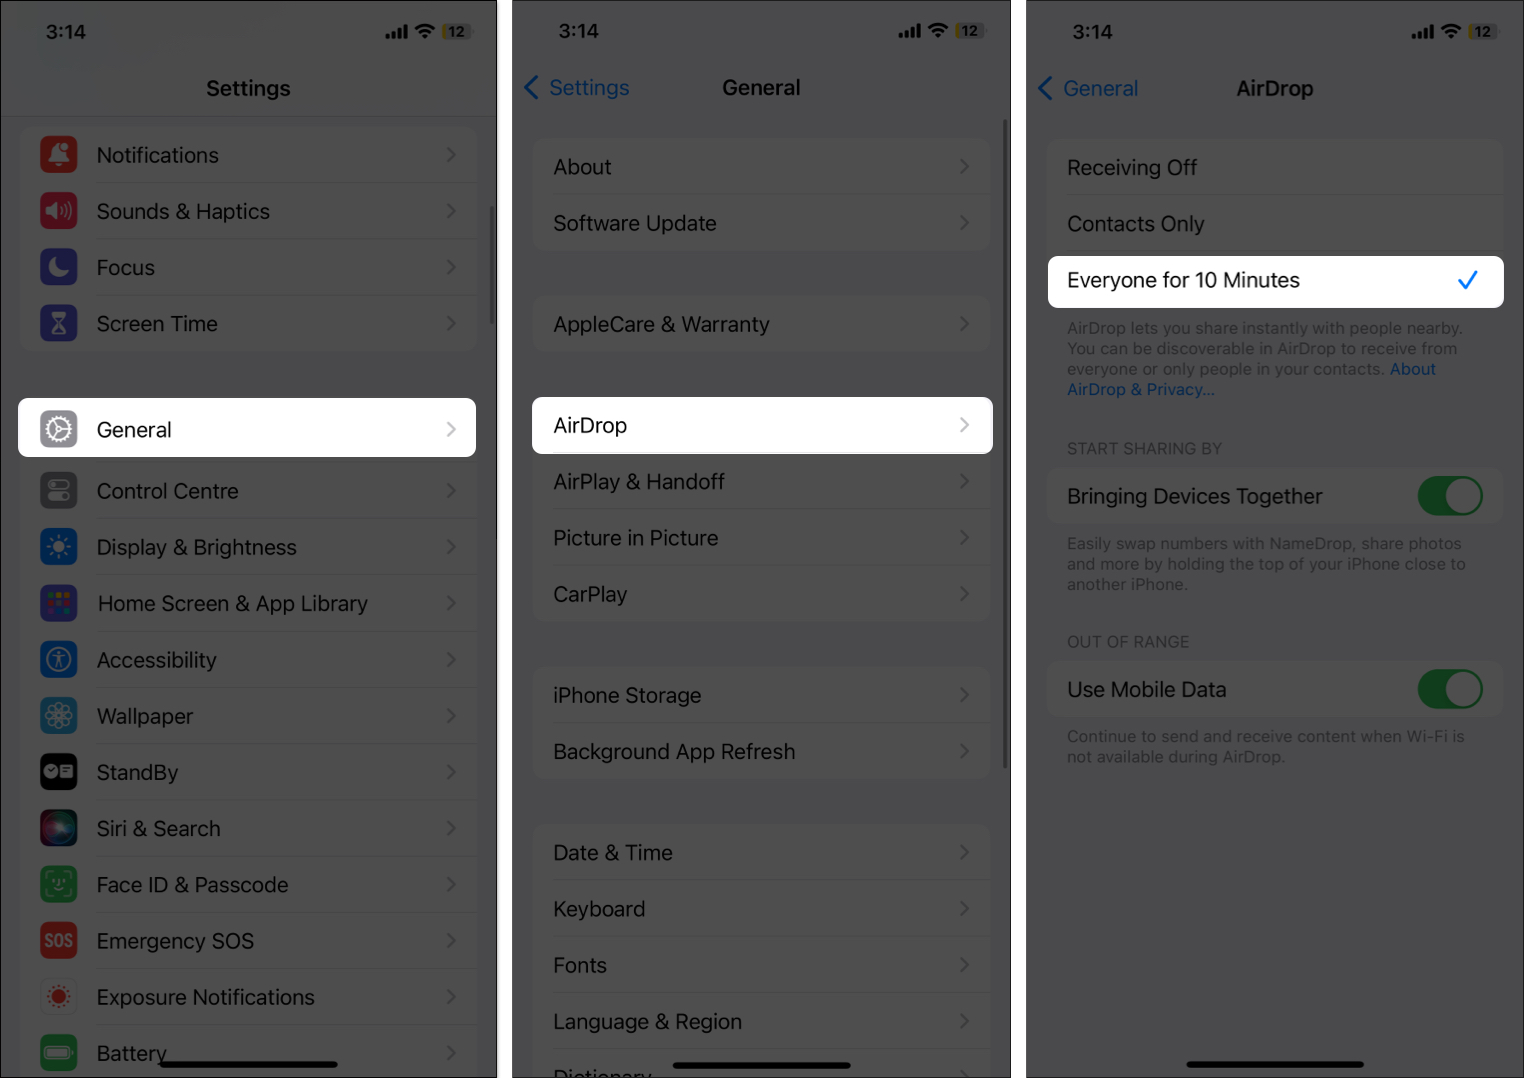 Adjust AirDrop settings to everyone on iPhone